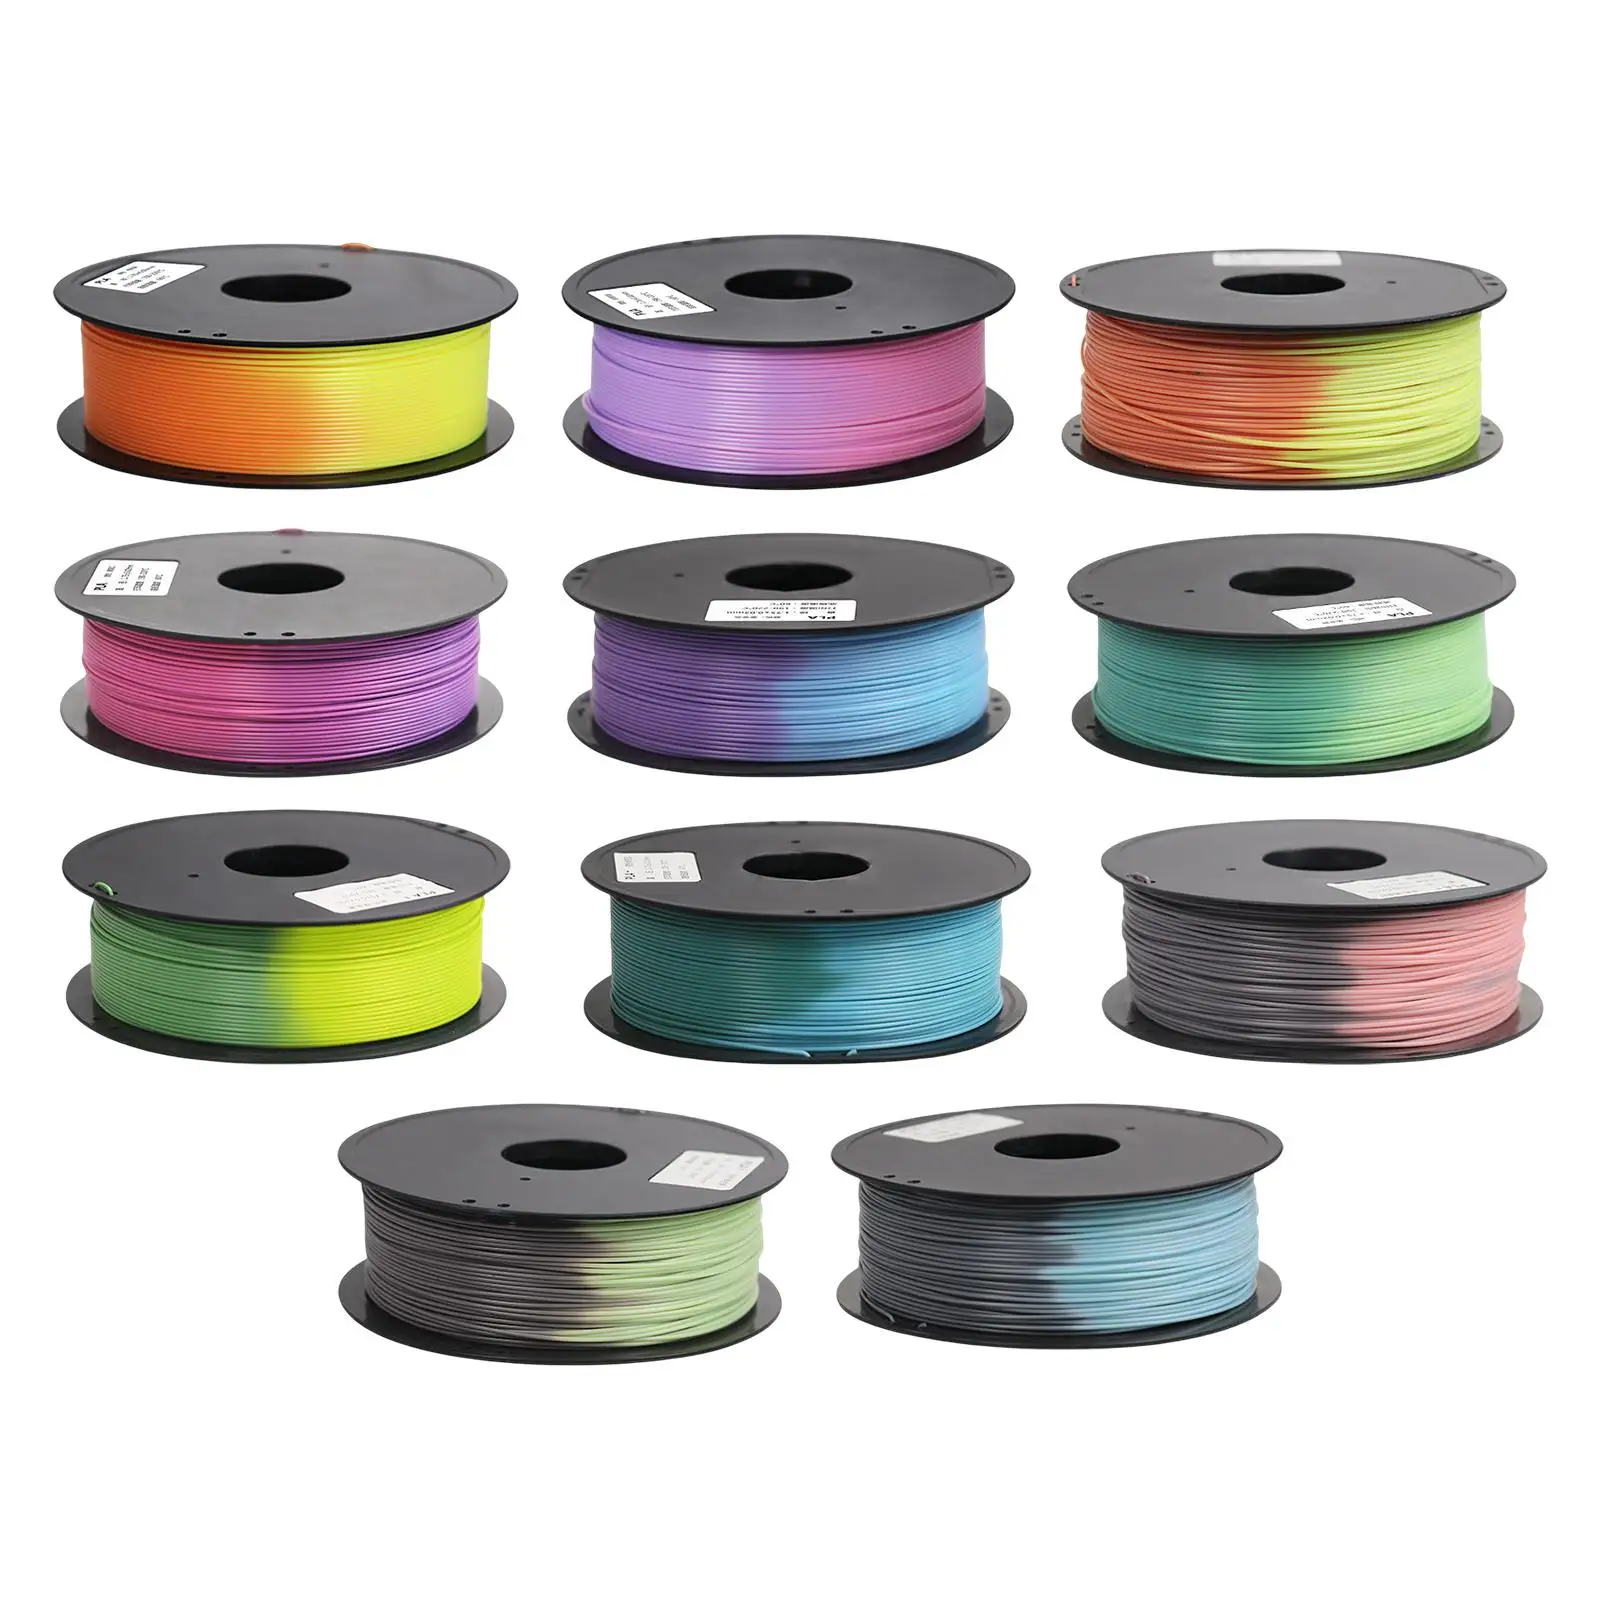 

Pla 3D Printer Filament Stable Wire Output Low Shrinkage 1kg 2.2lbs 330 Meters Good Printing Effect dimensional Accuracy 1.75mm